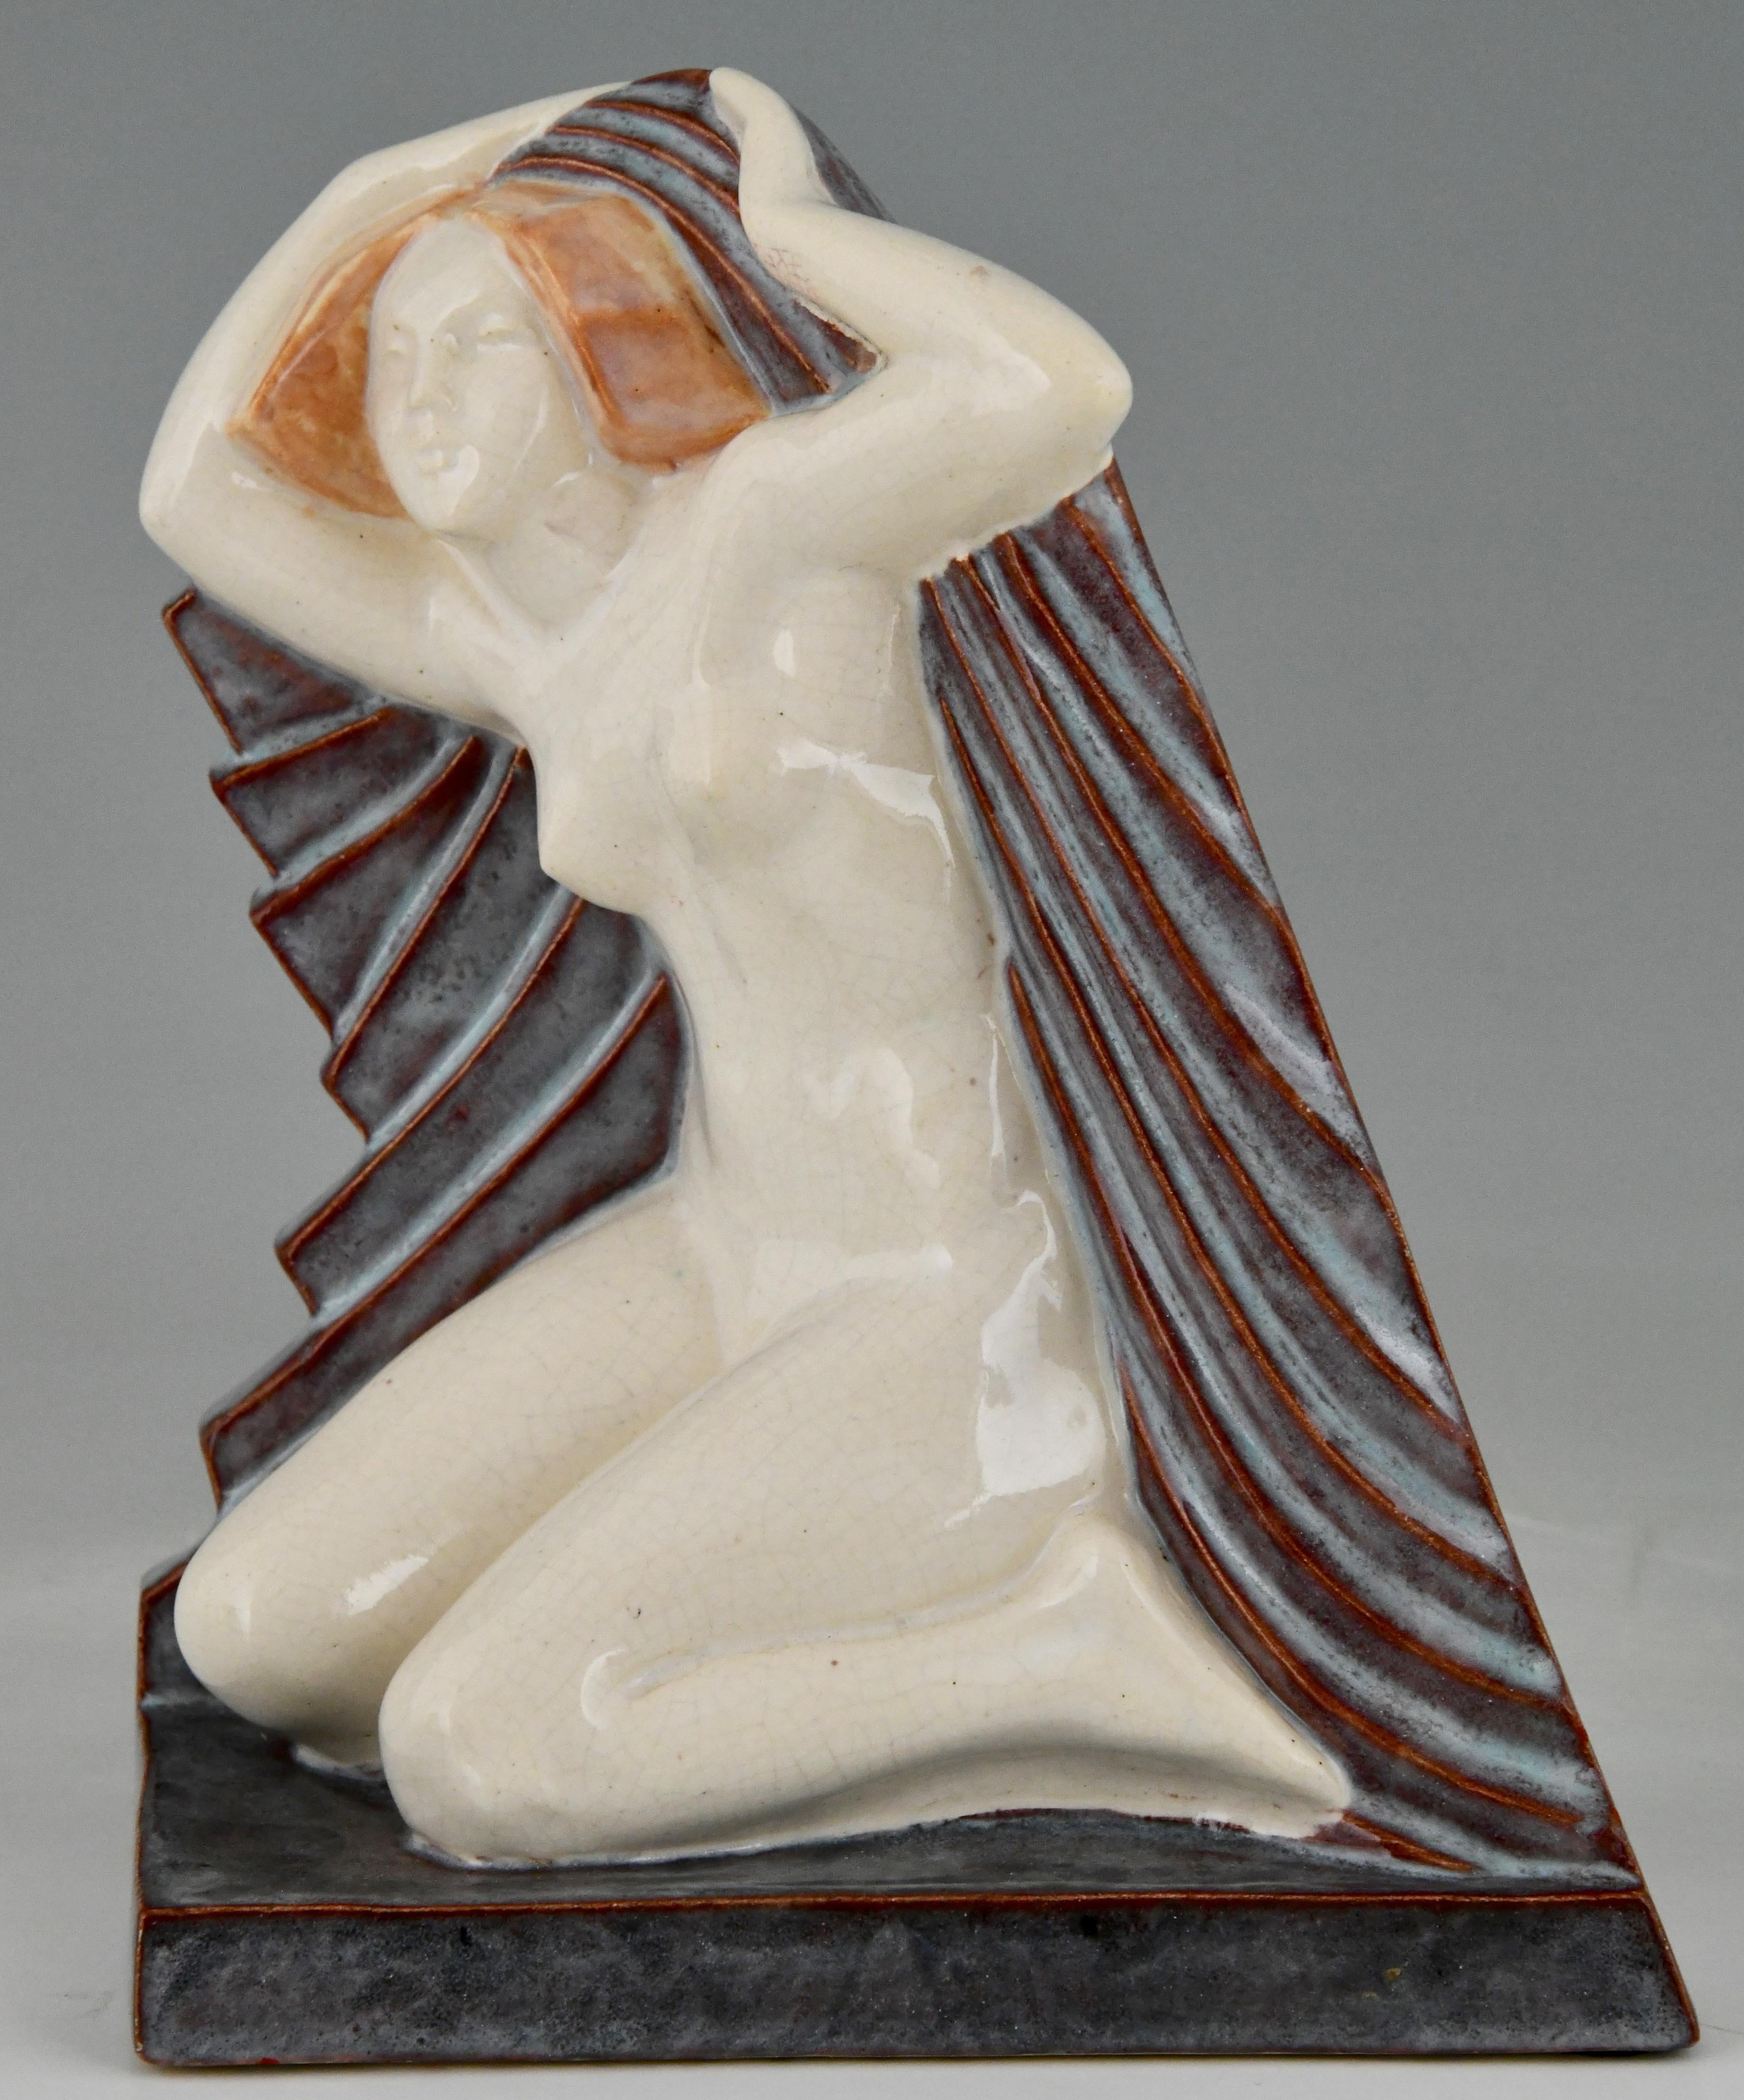 Early 20th Century Art Deco Set with Seated Nudes by Narezo for Kaza Editions 1925